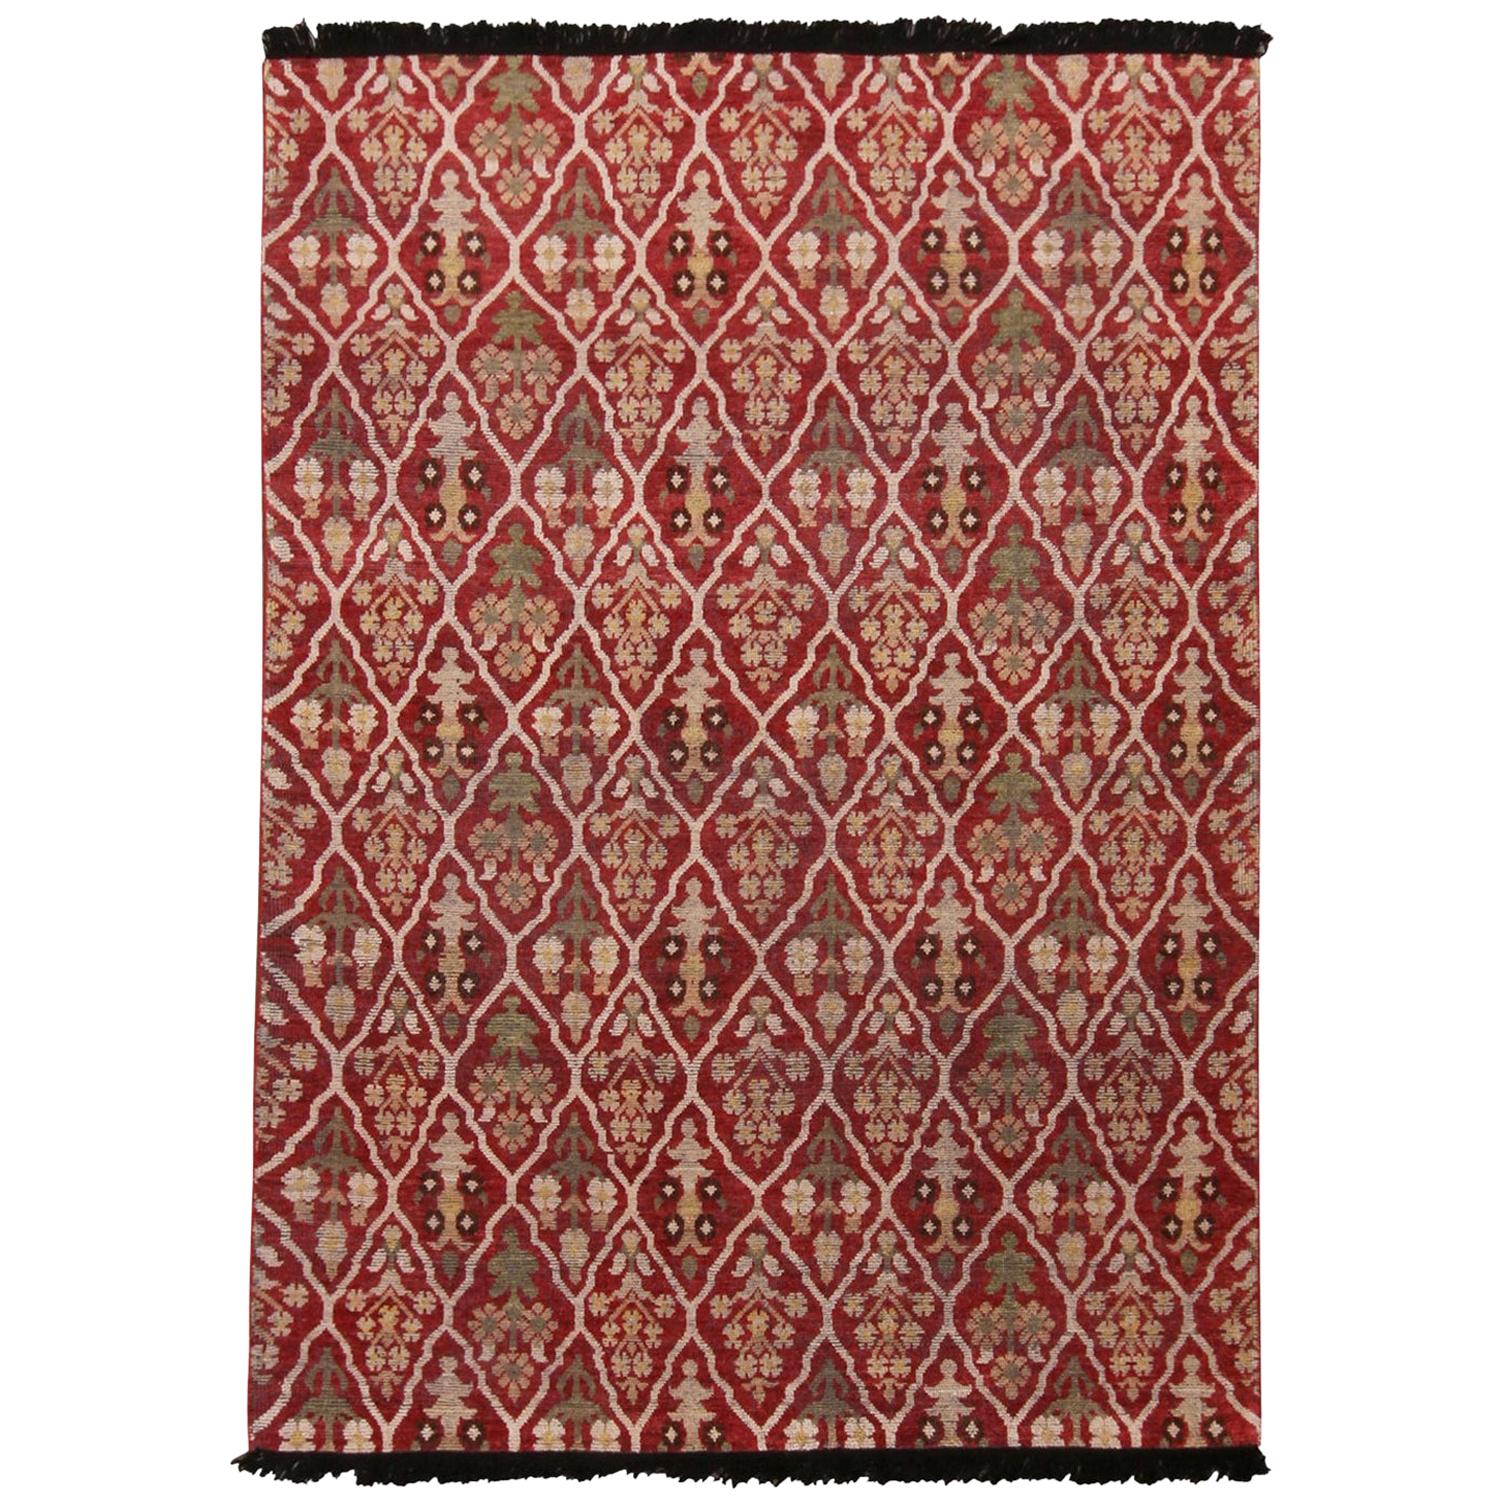 Burano Beige and Burgundy Red Wool Rug with Green Accents